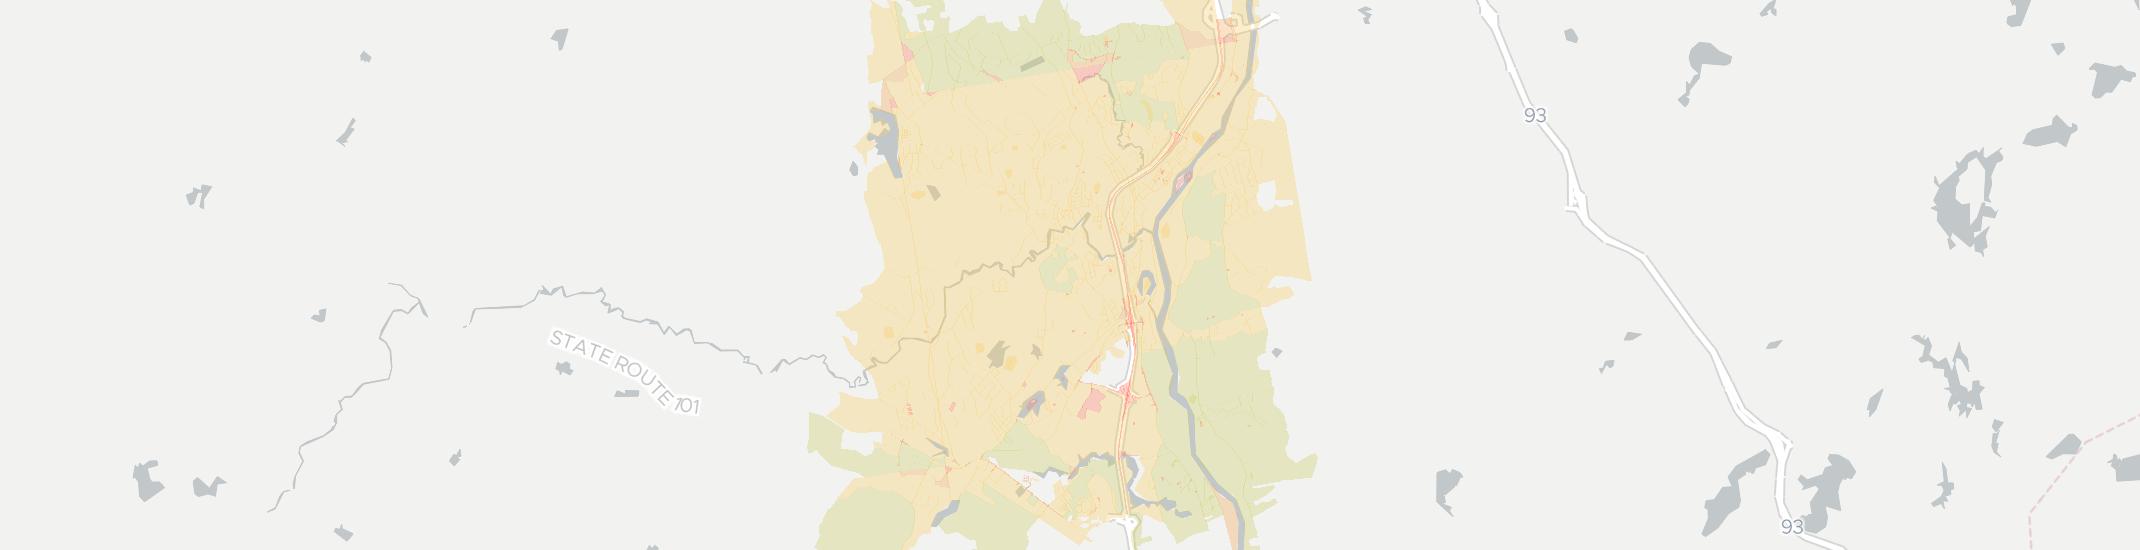 Merrimack Internet Competition Map. Click for interactive map.